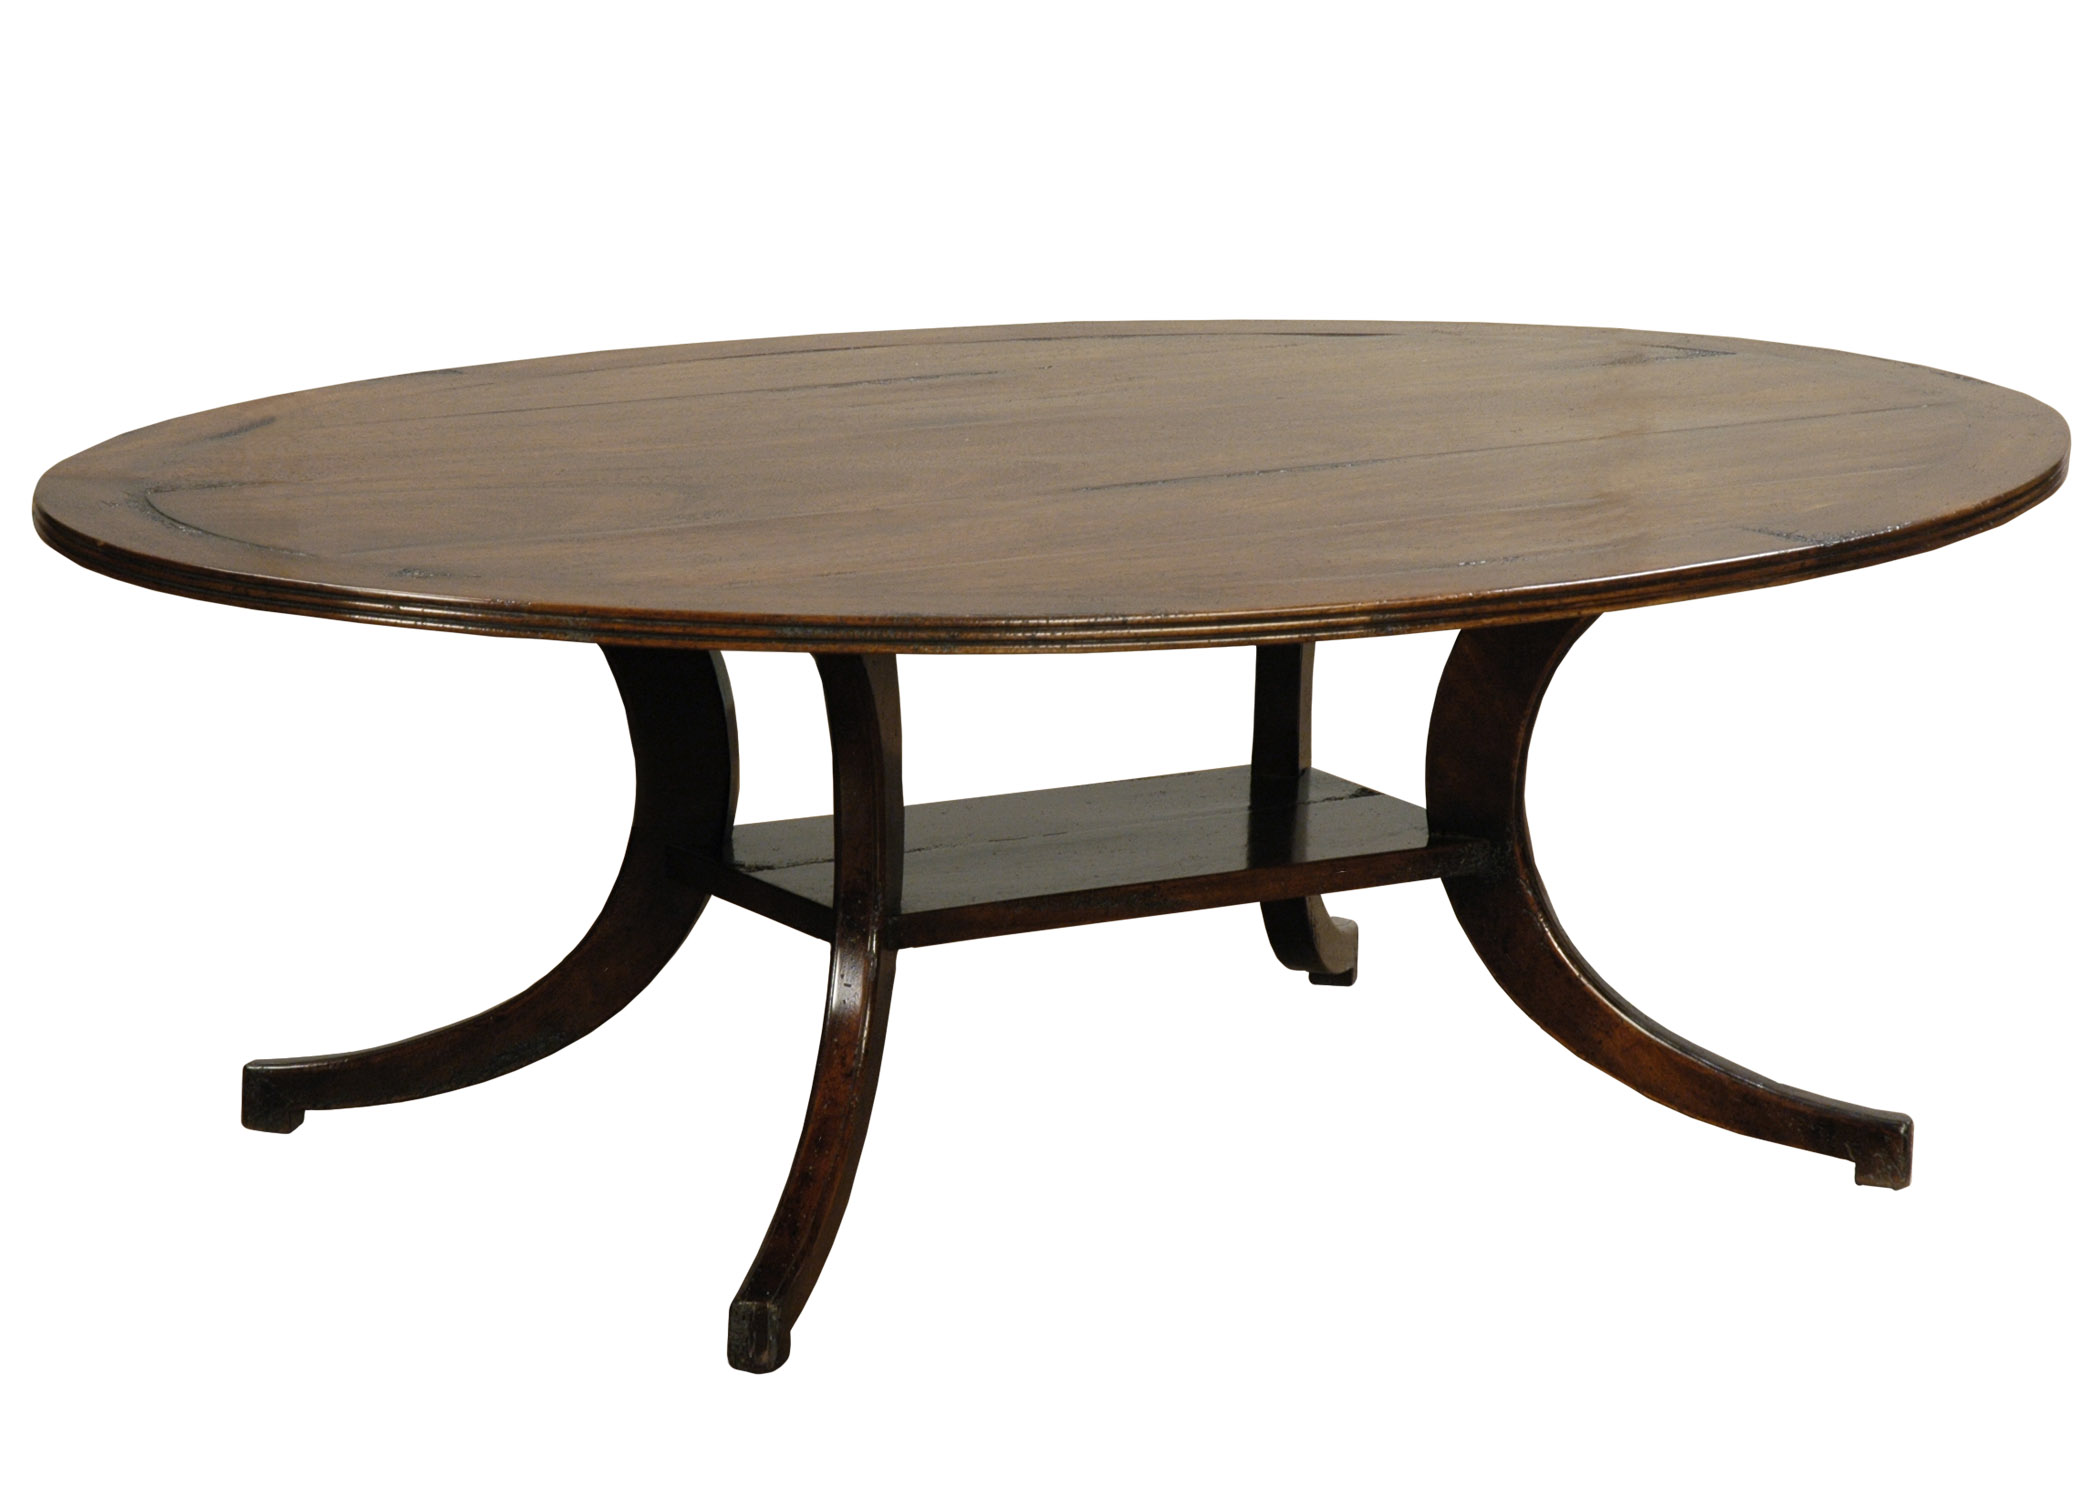 Falcaire Traditional transitional oval cocktail coffee table by Woodland furniture in Idaho Falls USA